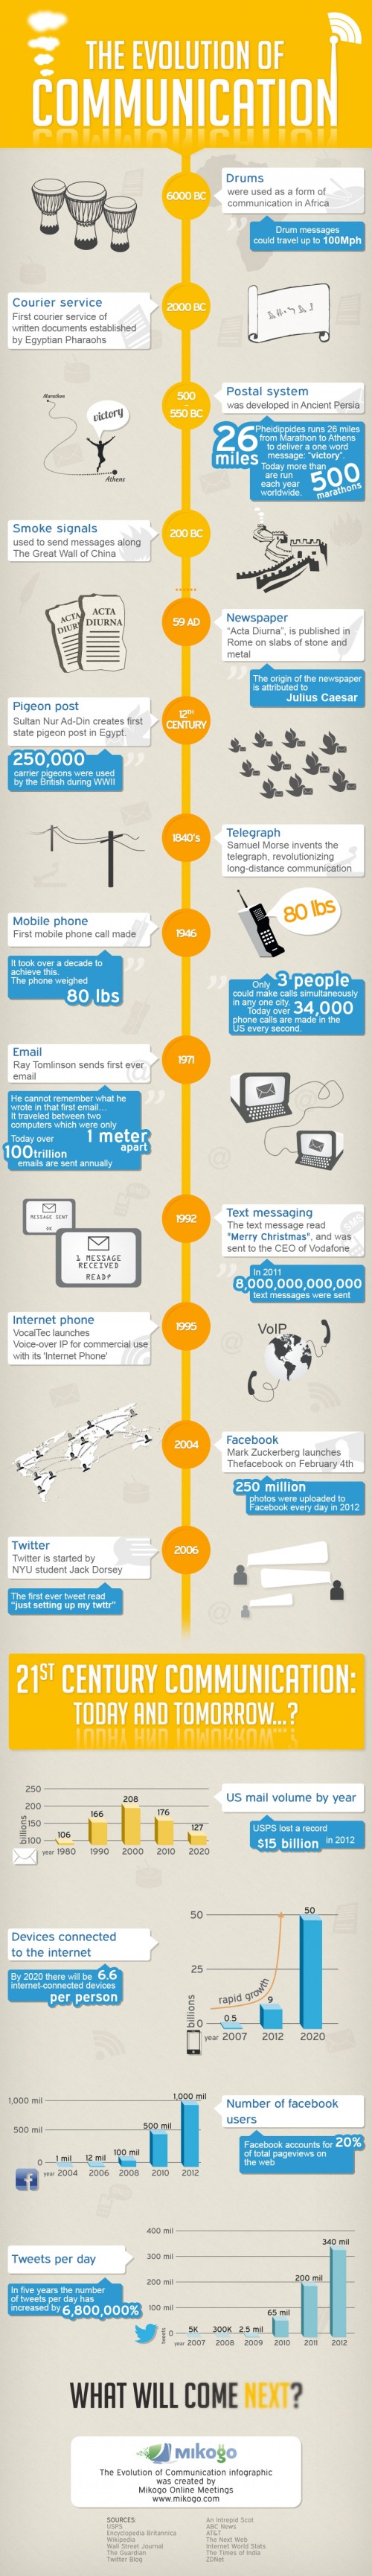 Evolution of Communication Infographic - exclusive for ViralBlog